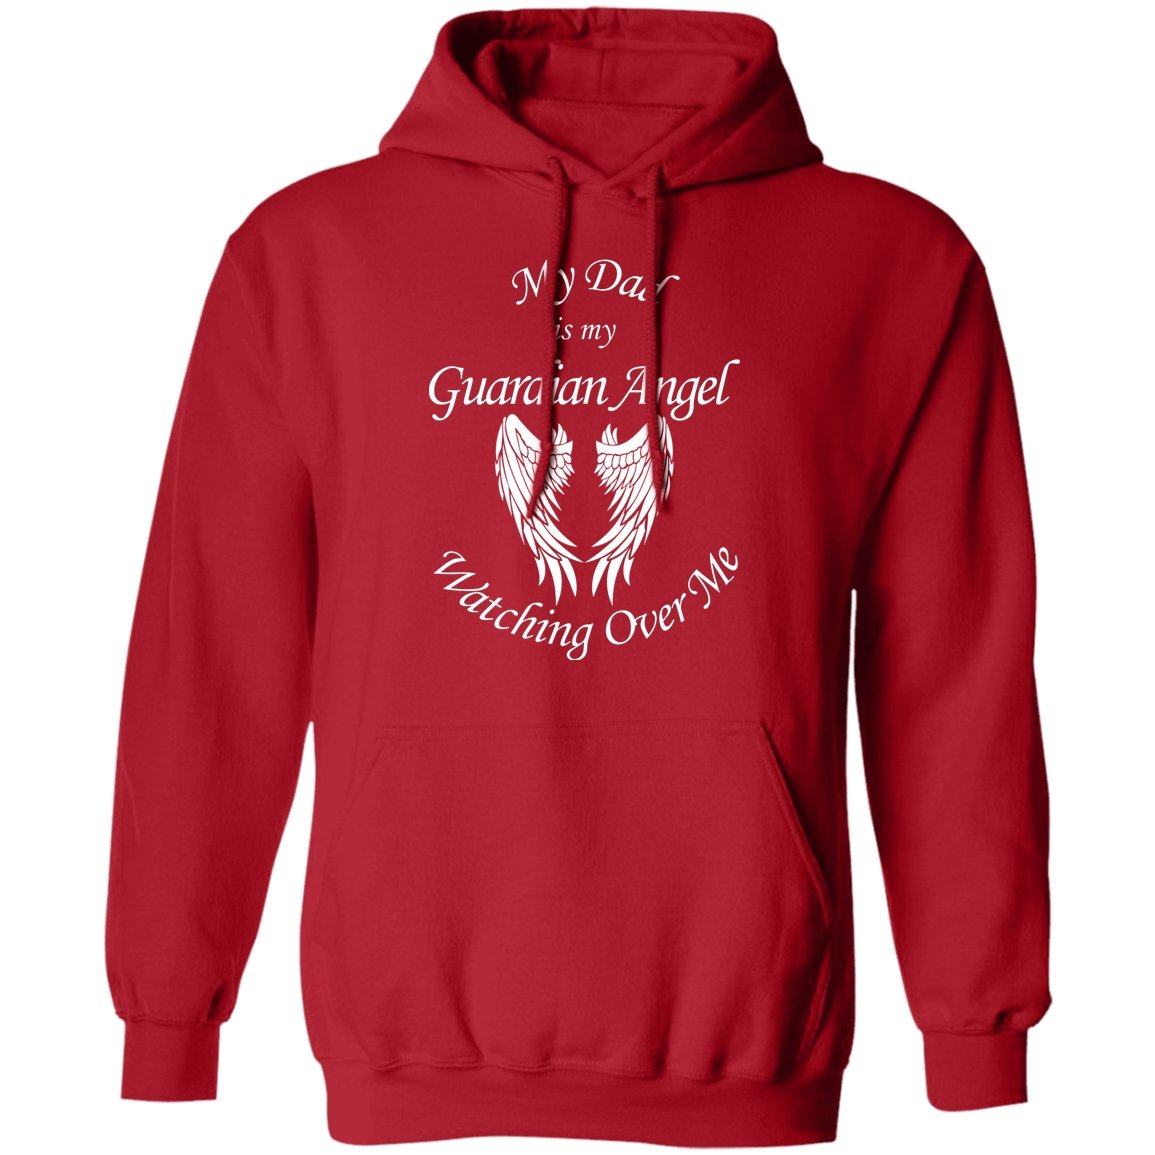 Dad is my Guardian Angel Watching Over Me Apparel | Apparel | American Greatness, american made, american shirt, american shirts, gift for dad, gifts, gifts for men, hoodie, made in usa, shirt, shirts, sweatshirt, sweatshirts, tank top, usa, usa apparel, usa made | TageUnlimited